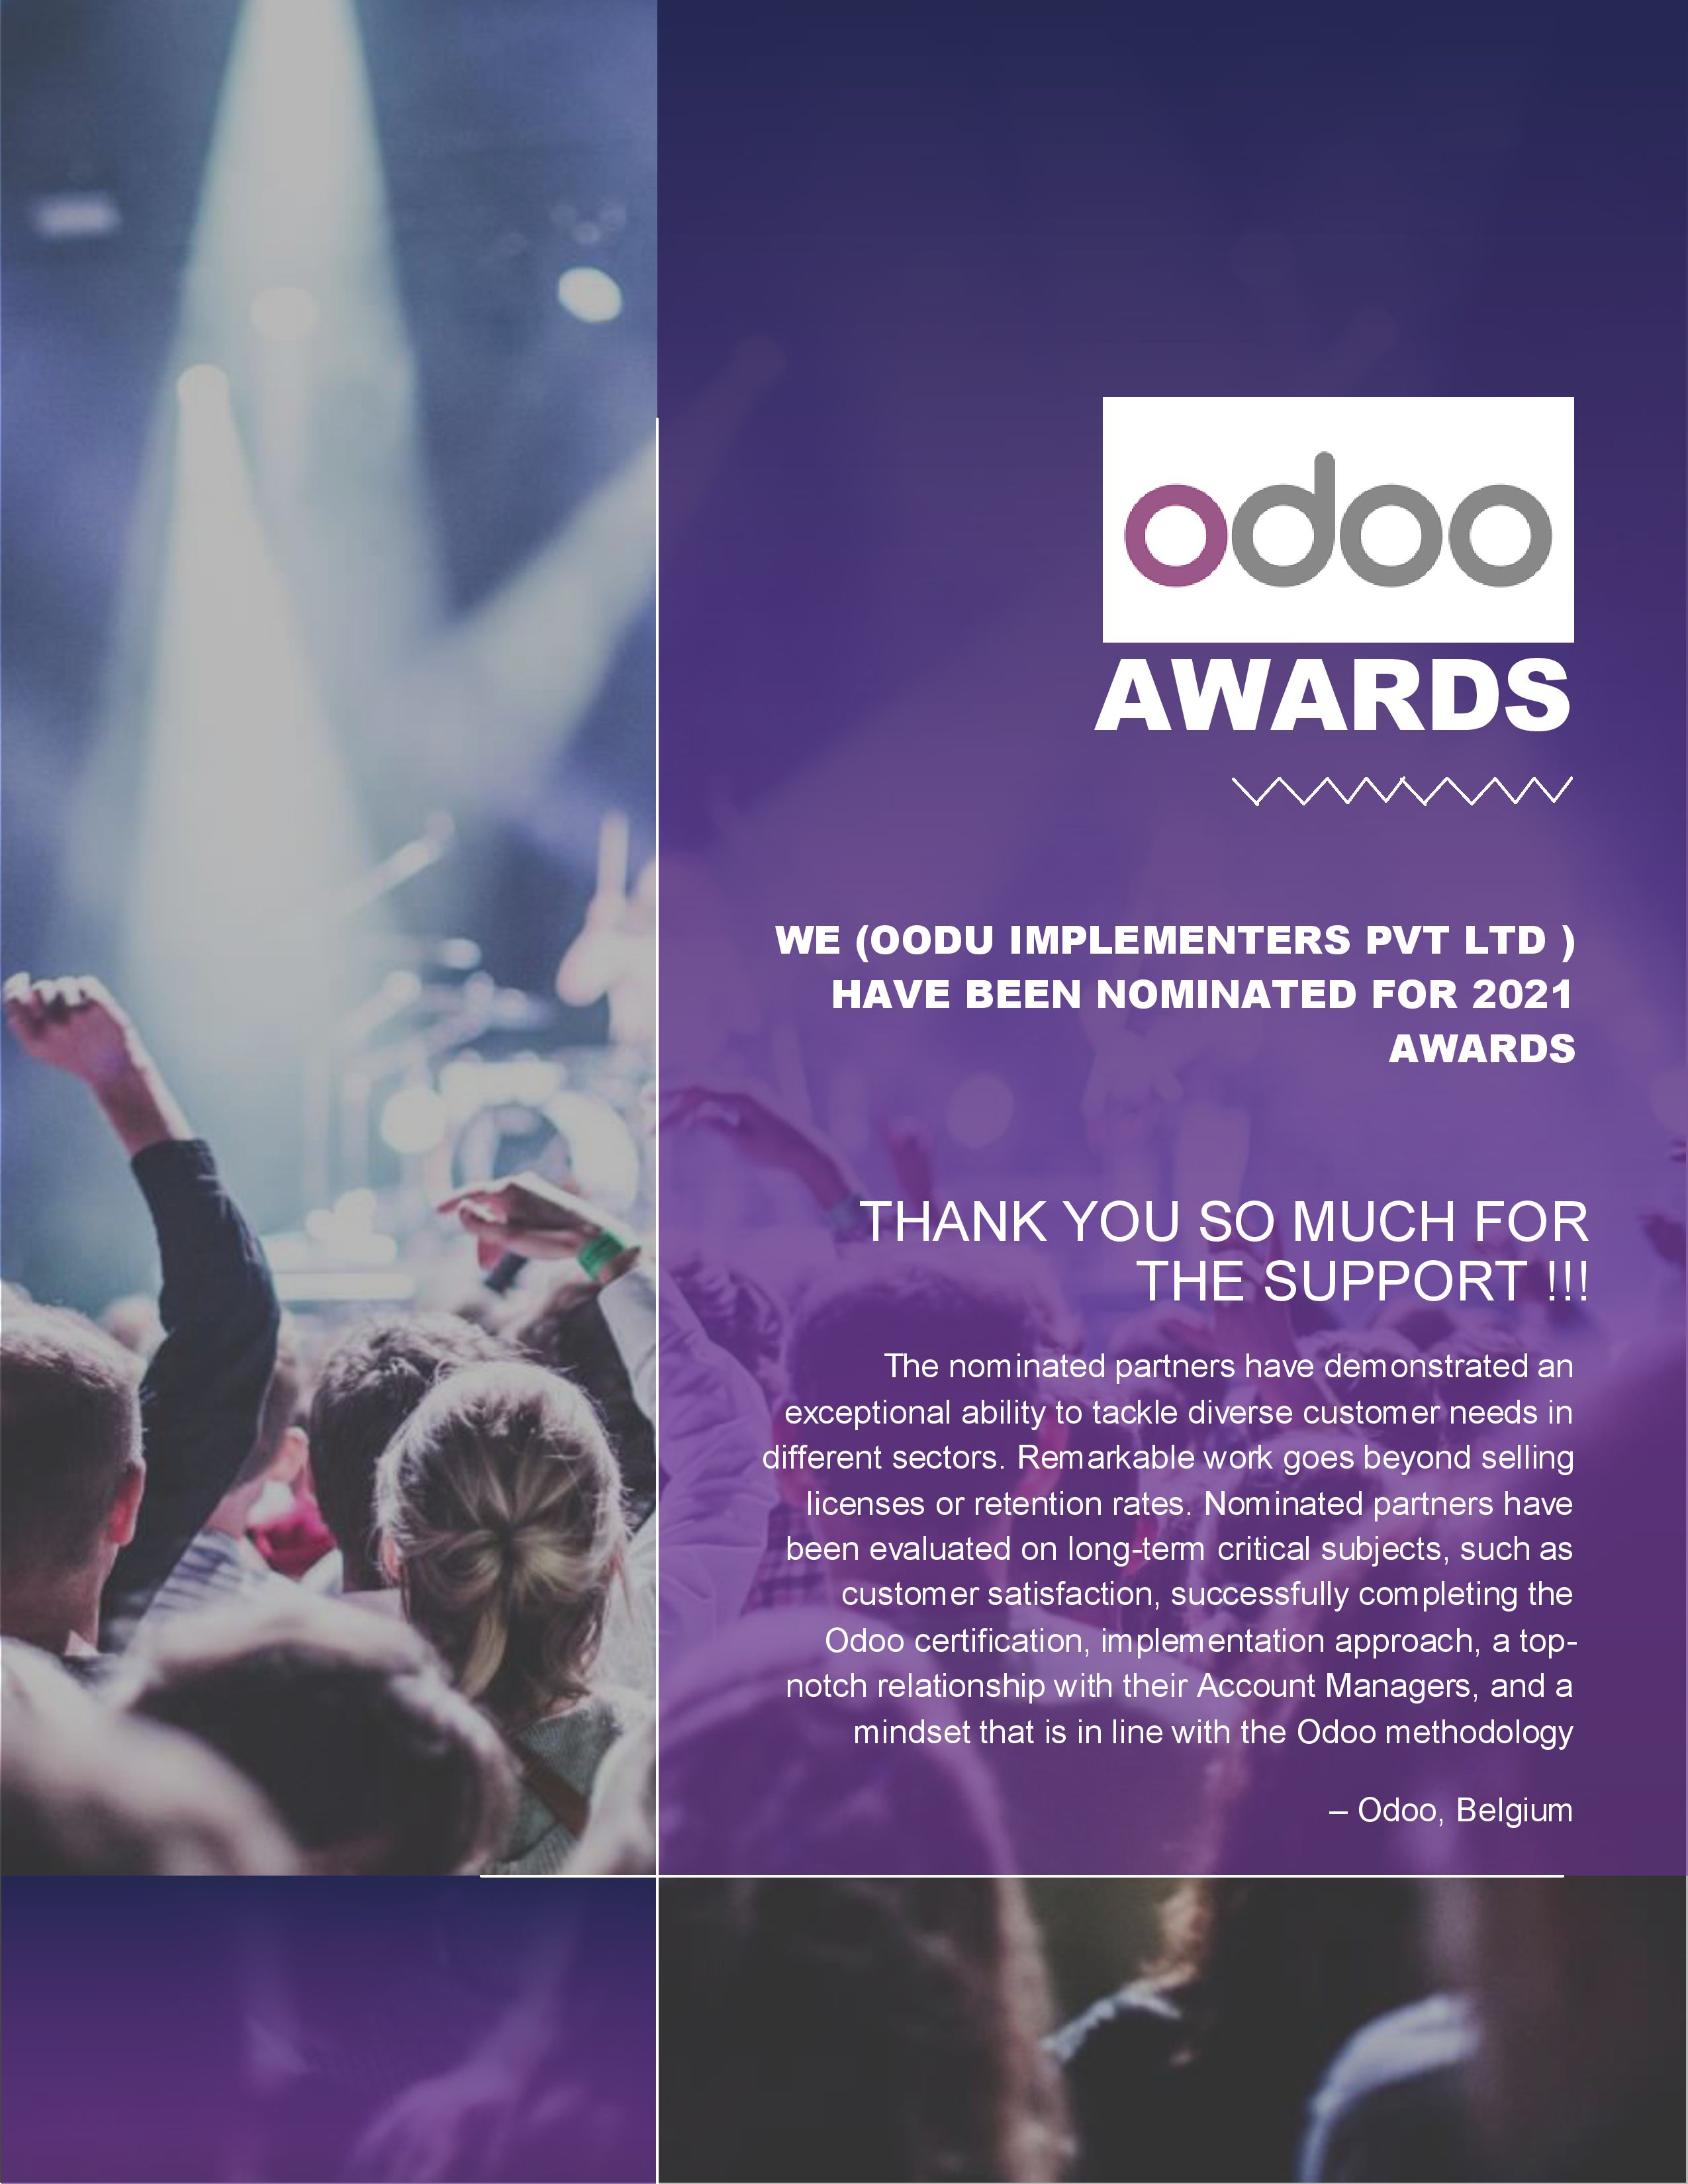 odoo ERP solutions nominated for Awards 2021